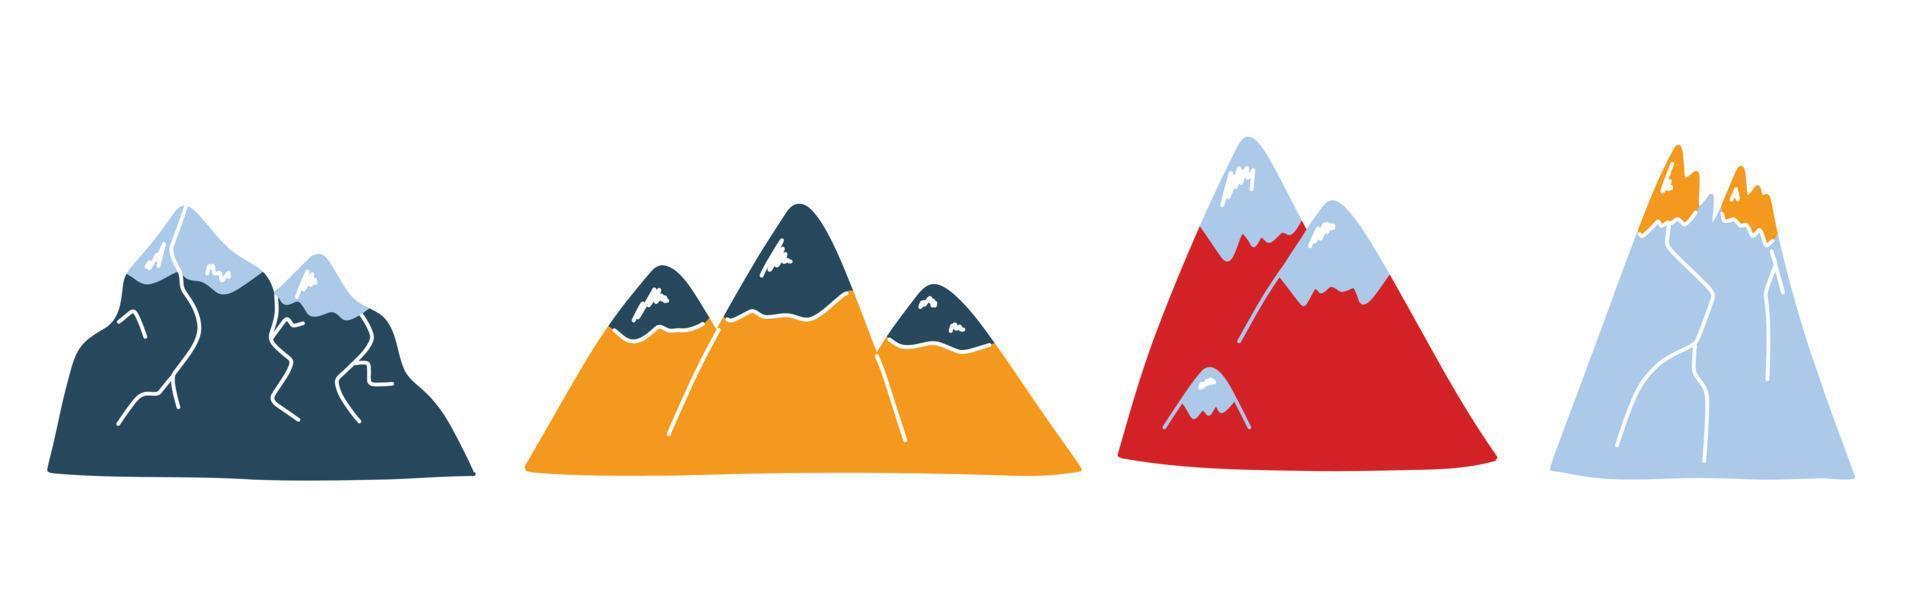 Vector set with cute colored mountains in doodle style, colorful cartoon mountain tops. Cute illustrations for postcards, posters, fabrics, design